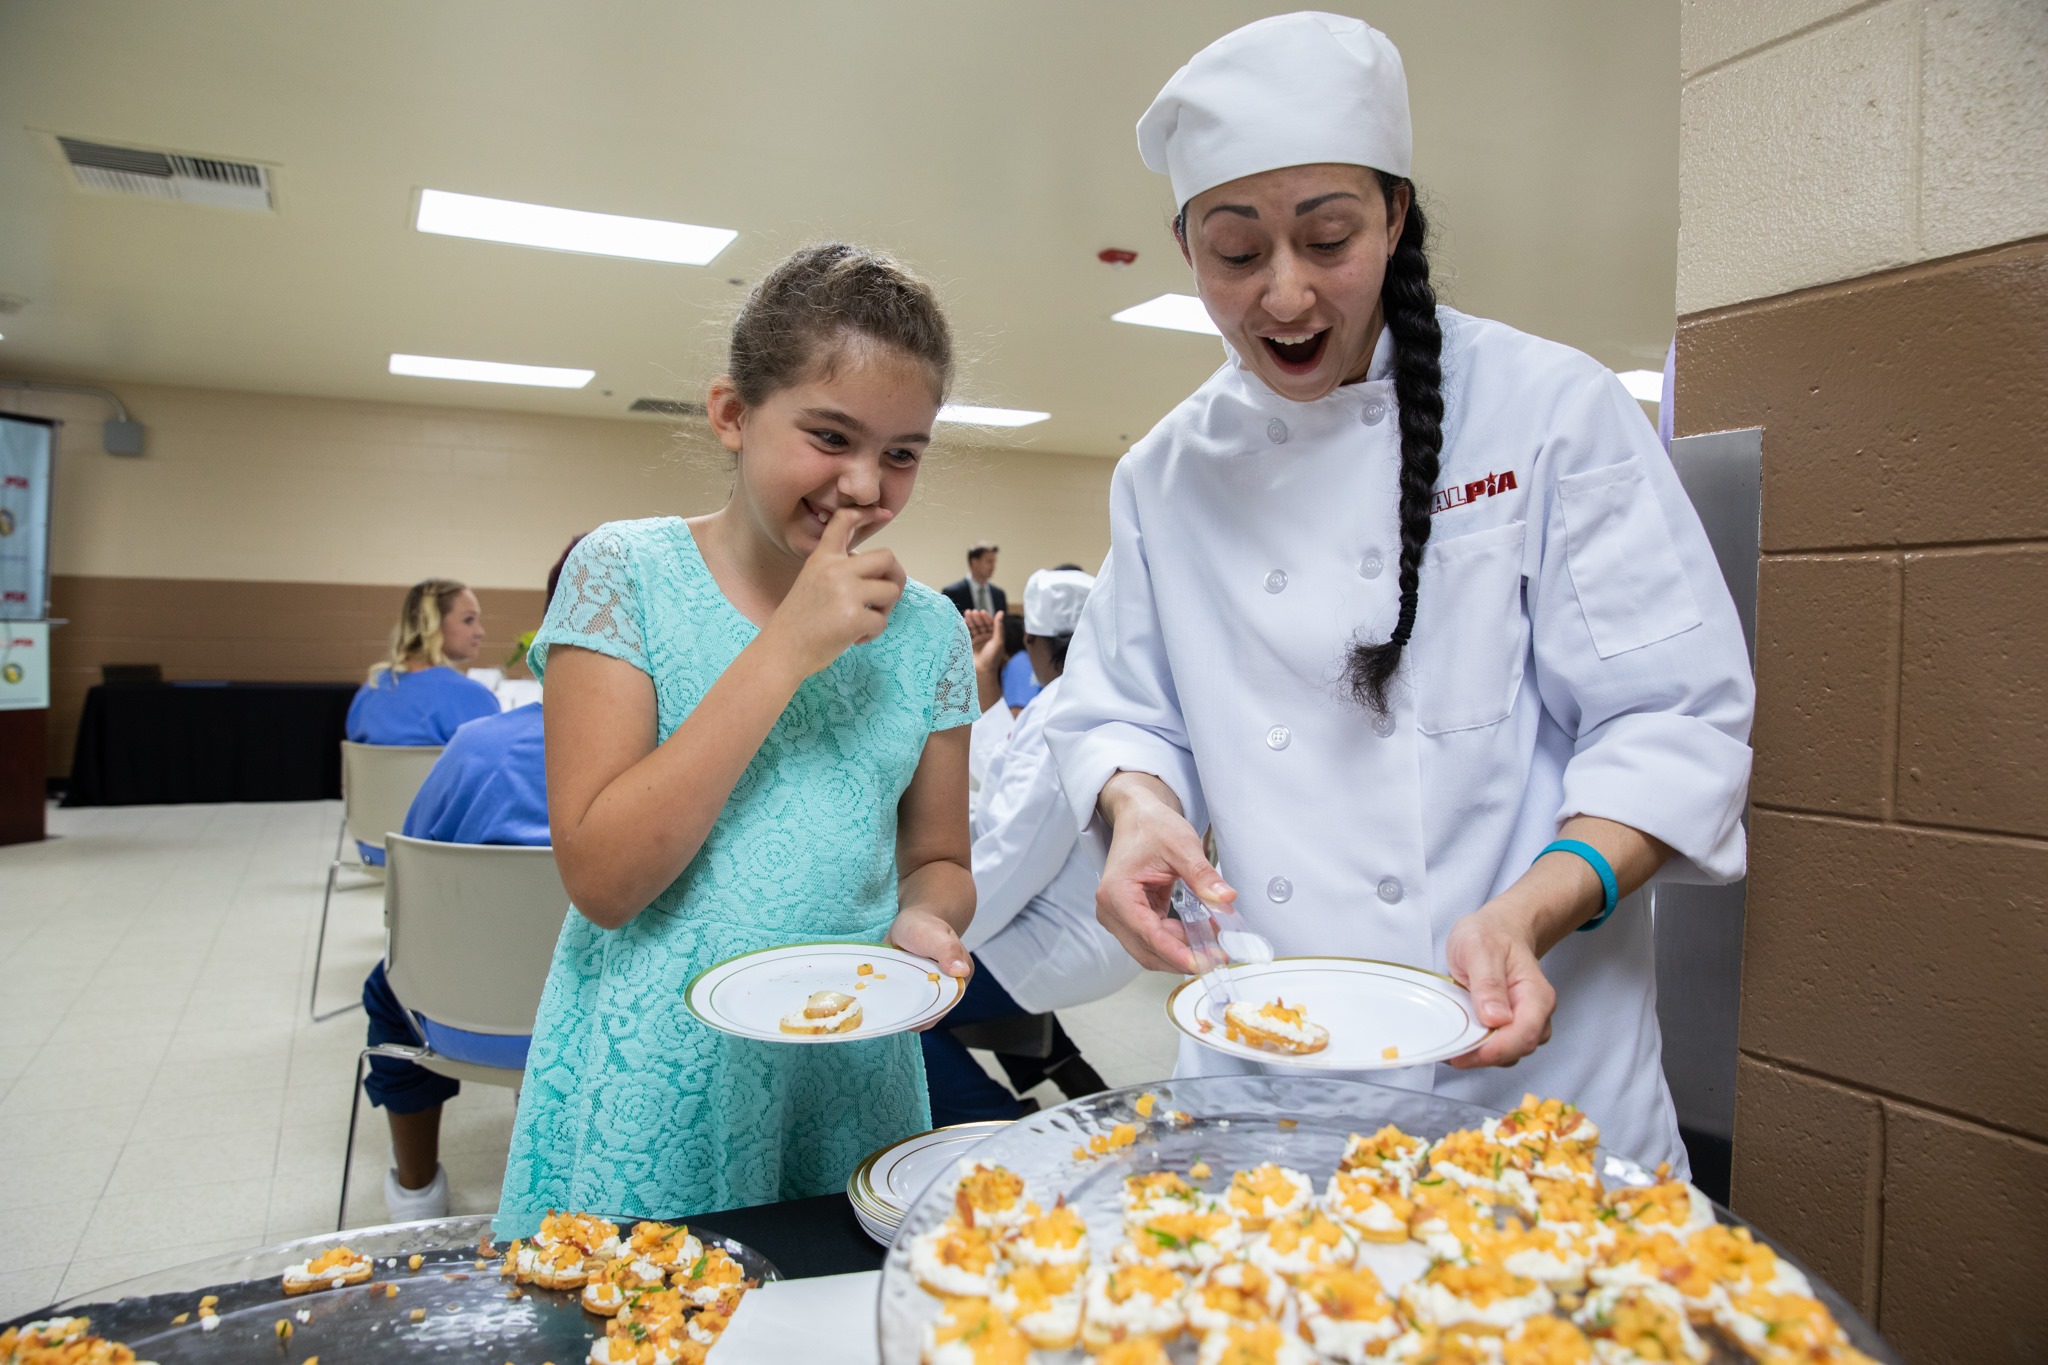 Woman in chef's clothing and young girl sample food.